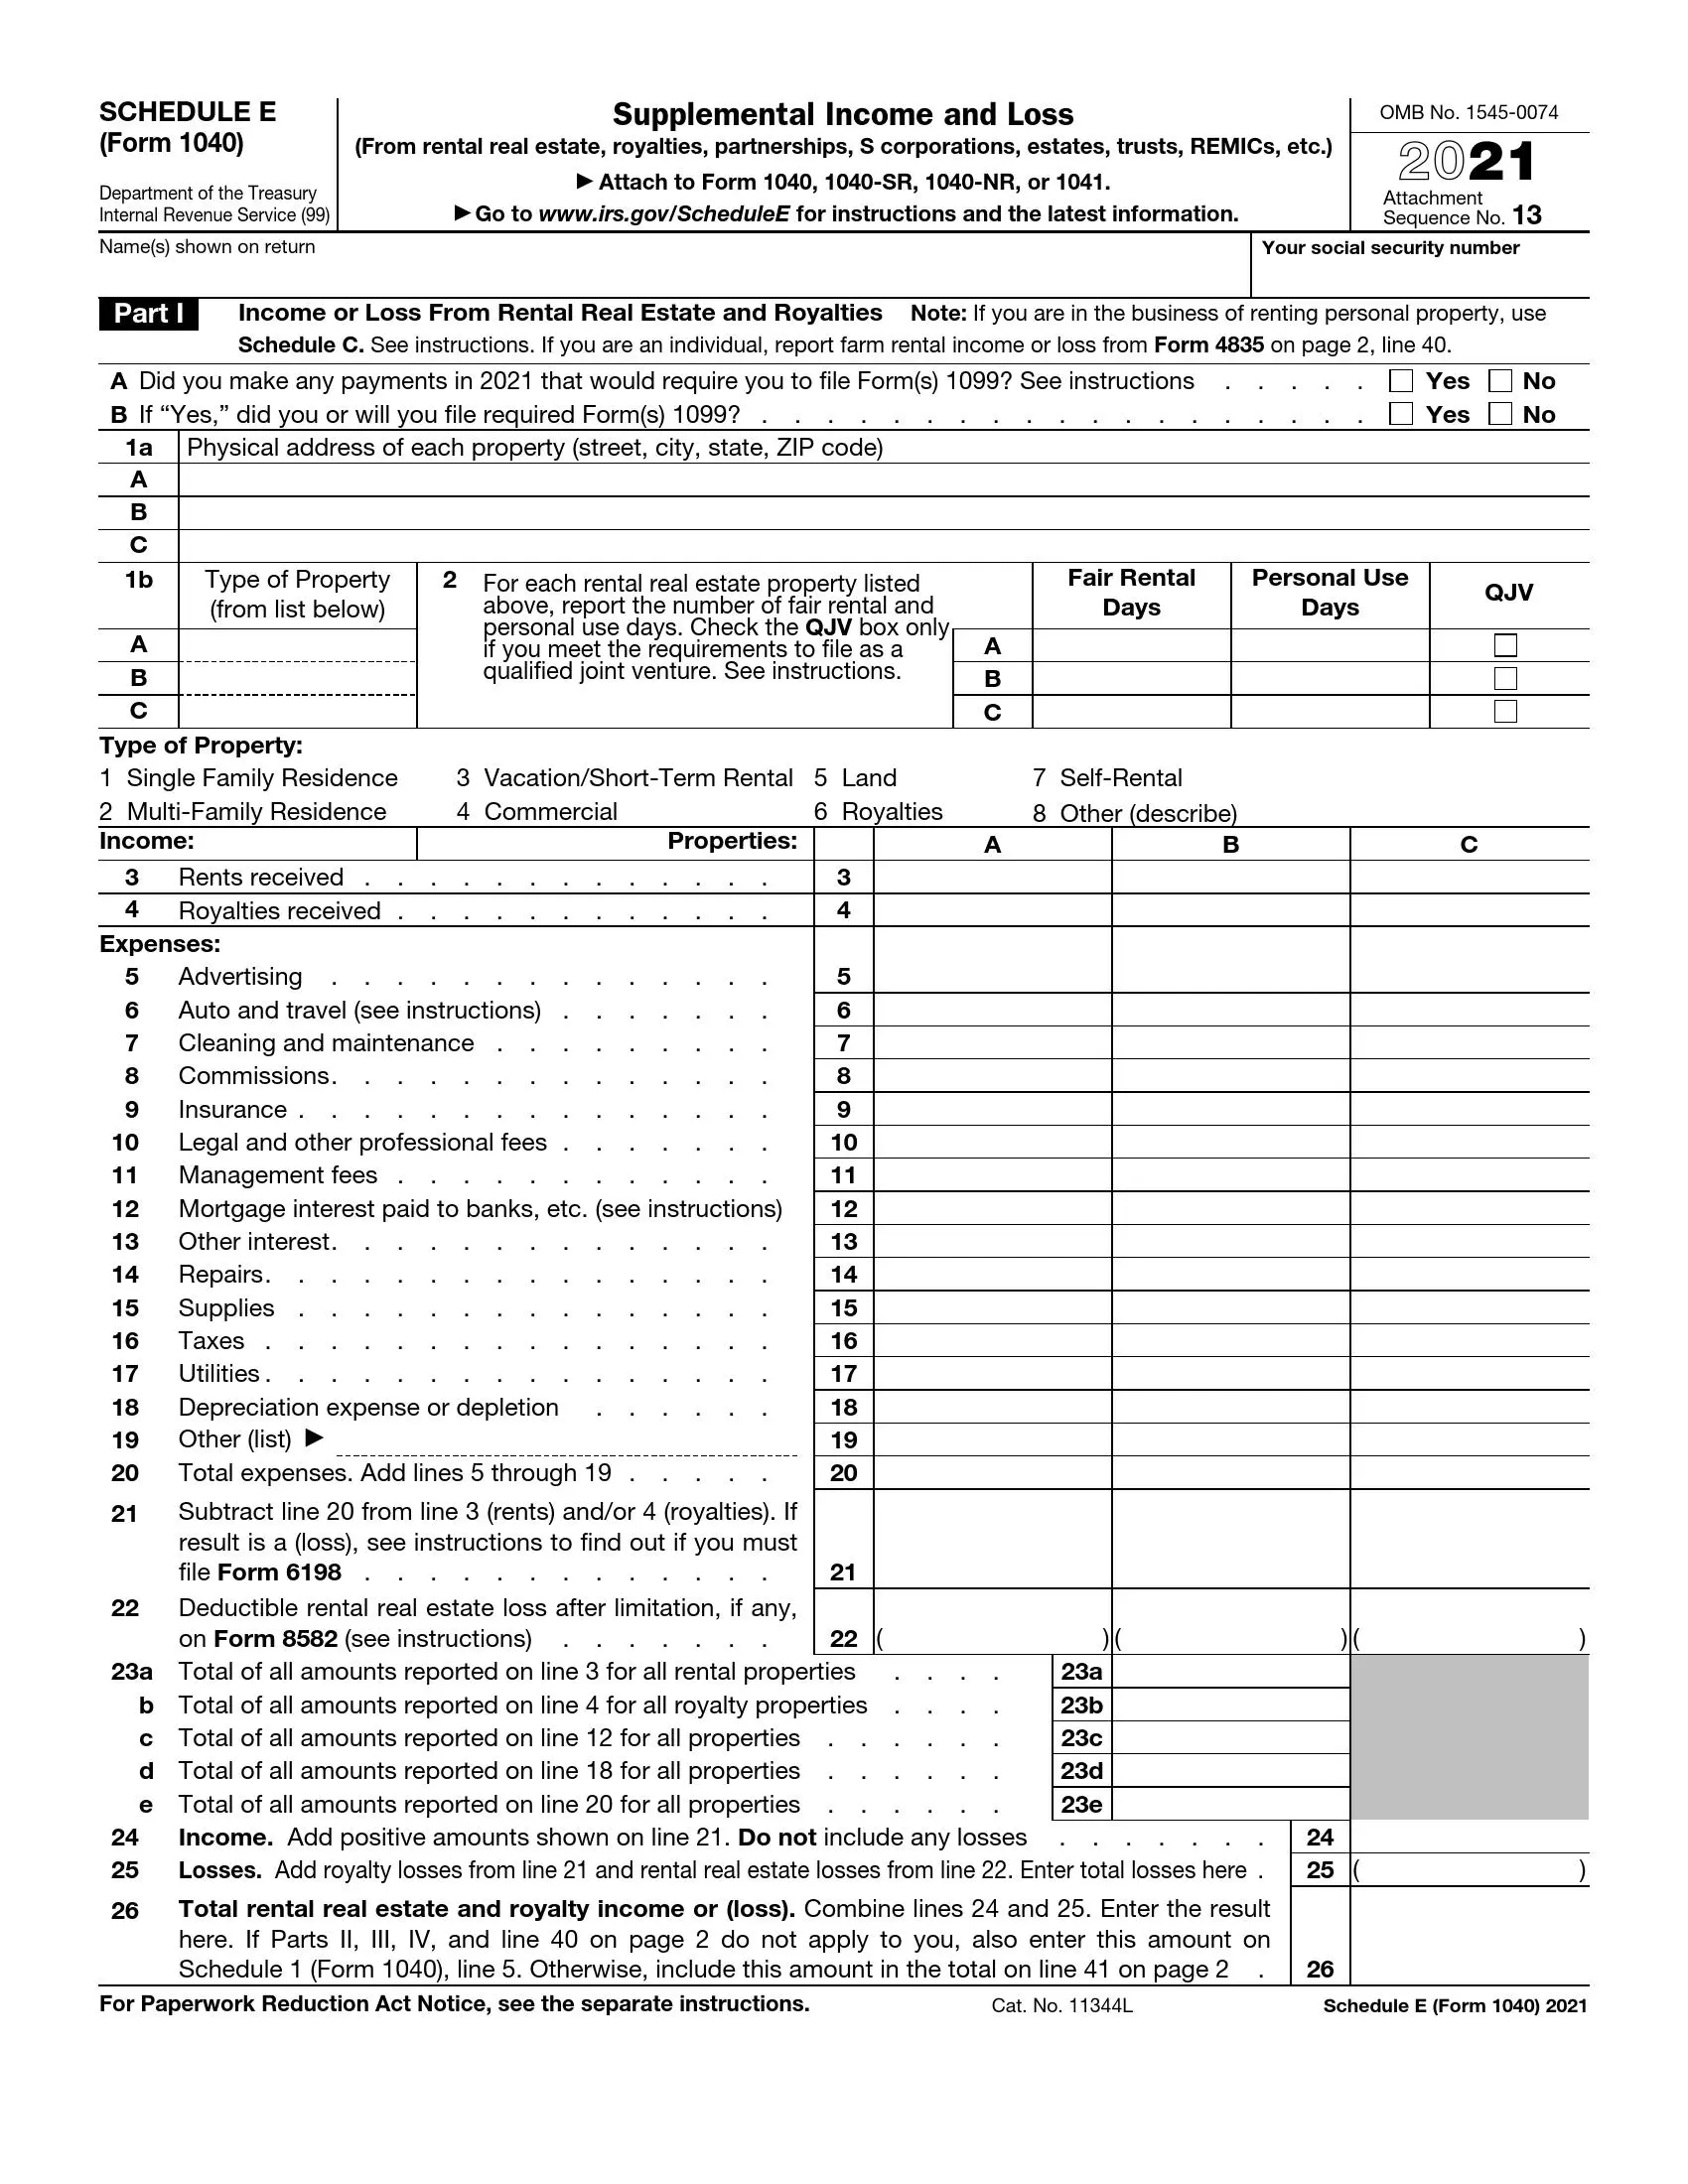 irs schedule e form 1040 2021 preview